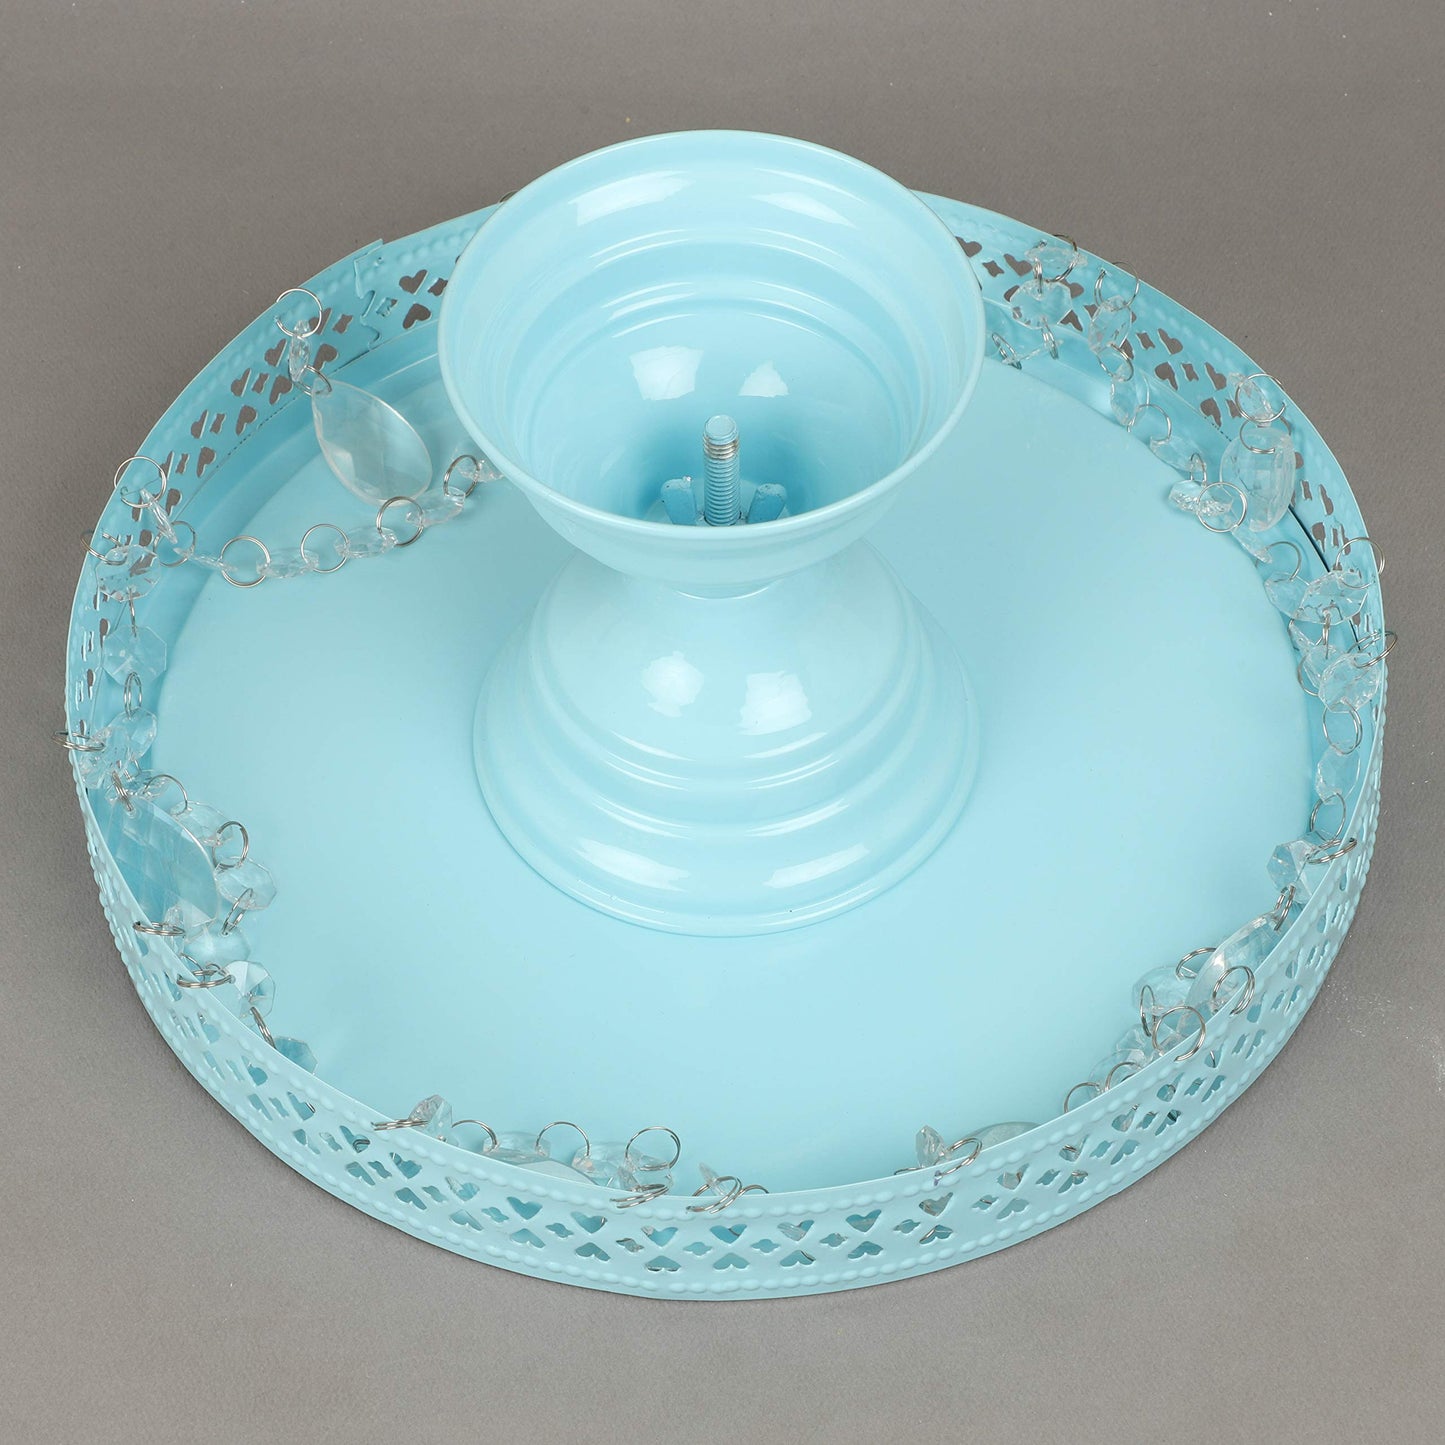 GiftBay Creations Cake Stand Pedestal 13" Diameter (Top), Strong Metal with Clear Hanging Crystals (Sky Blue)